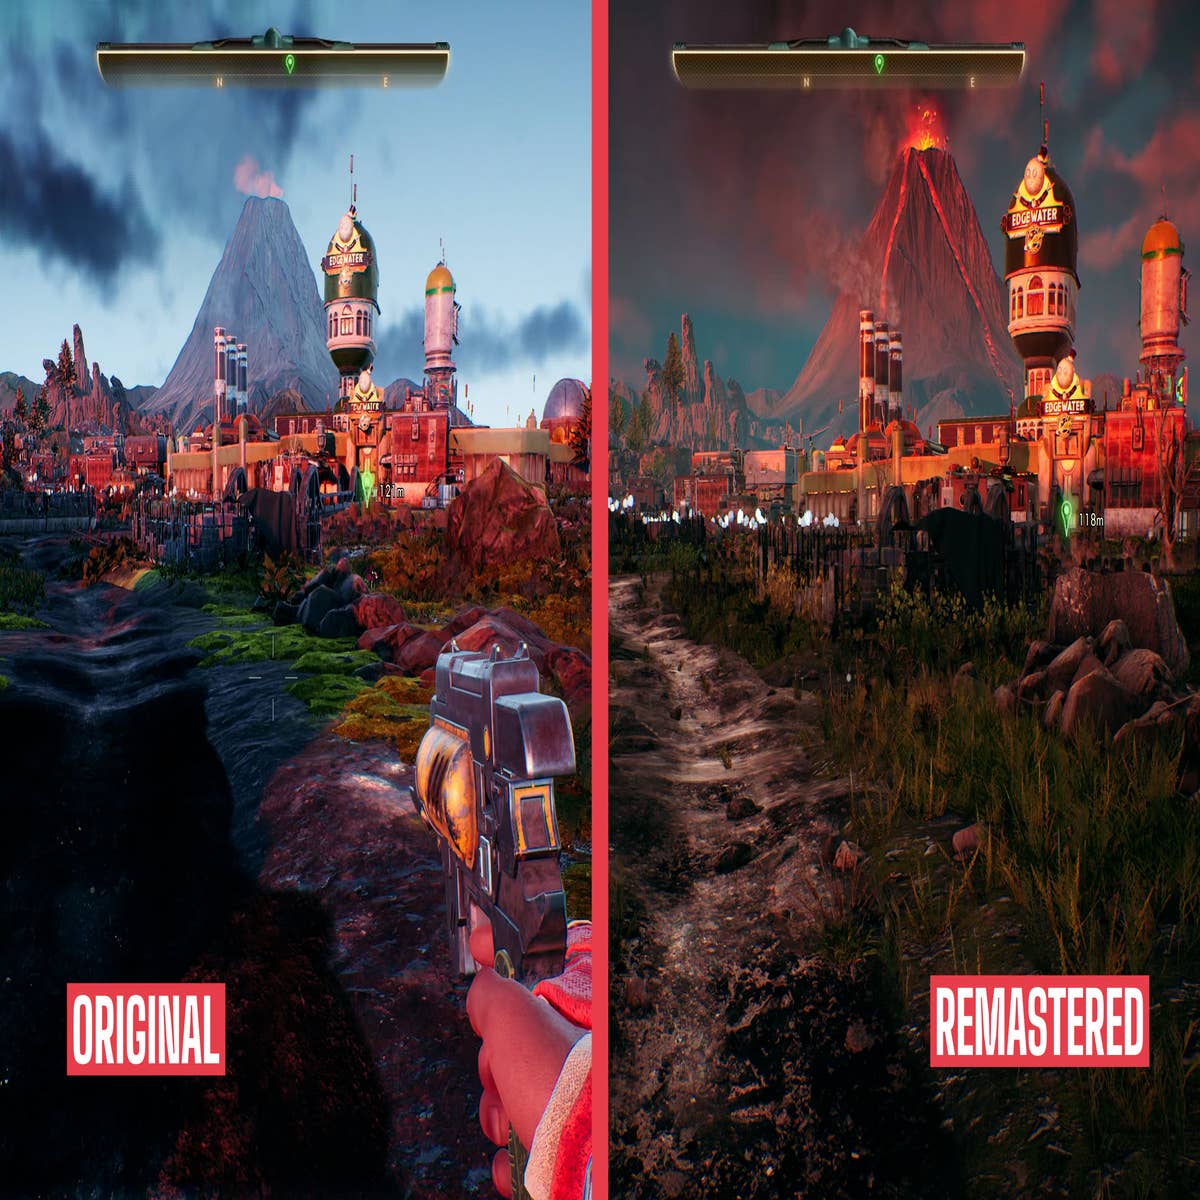 The Outer Worlds: Spacer's Choice Edition Review